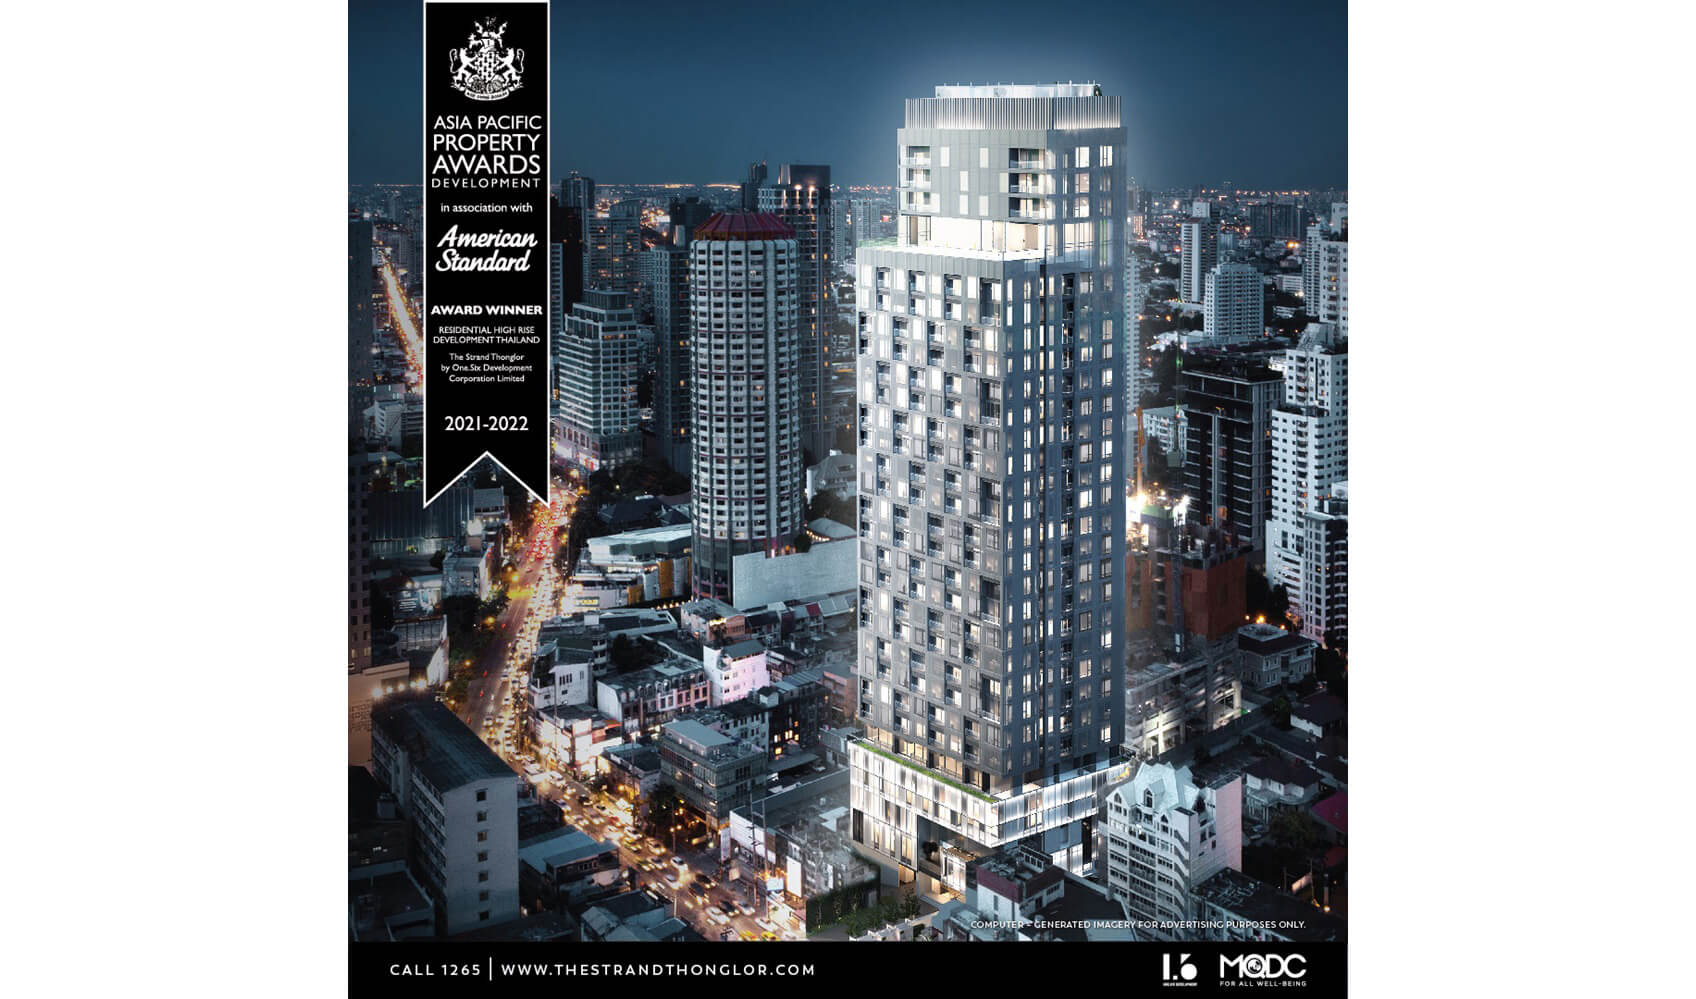 The Strand Thonglor Wins at Asia Pacific Property Awards